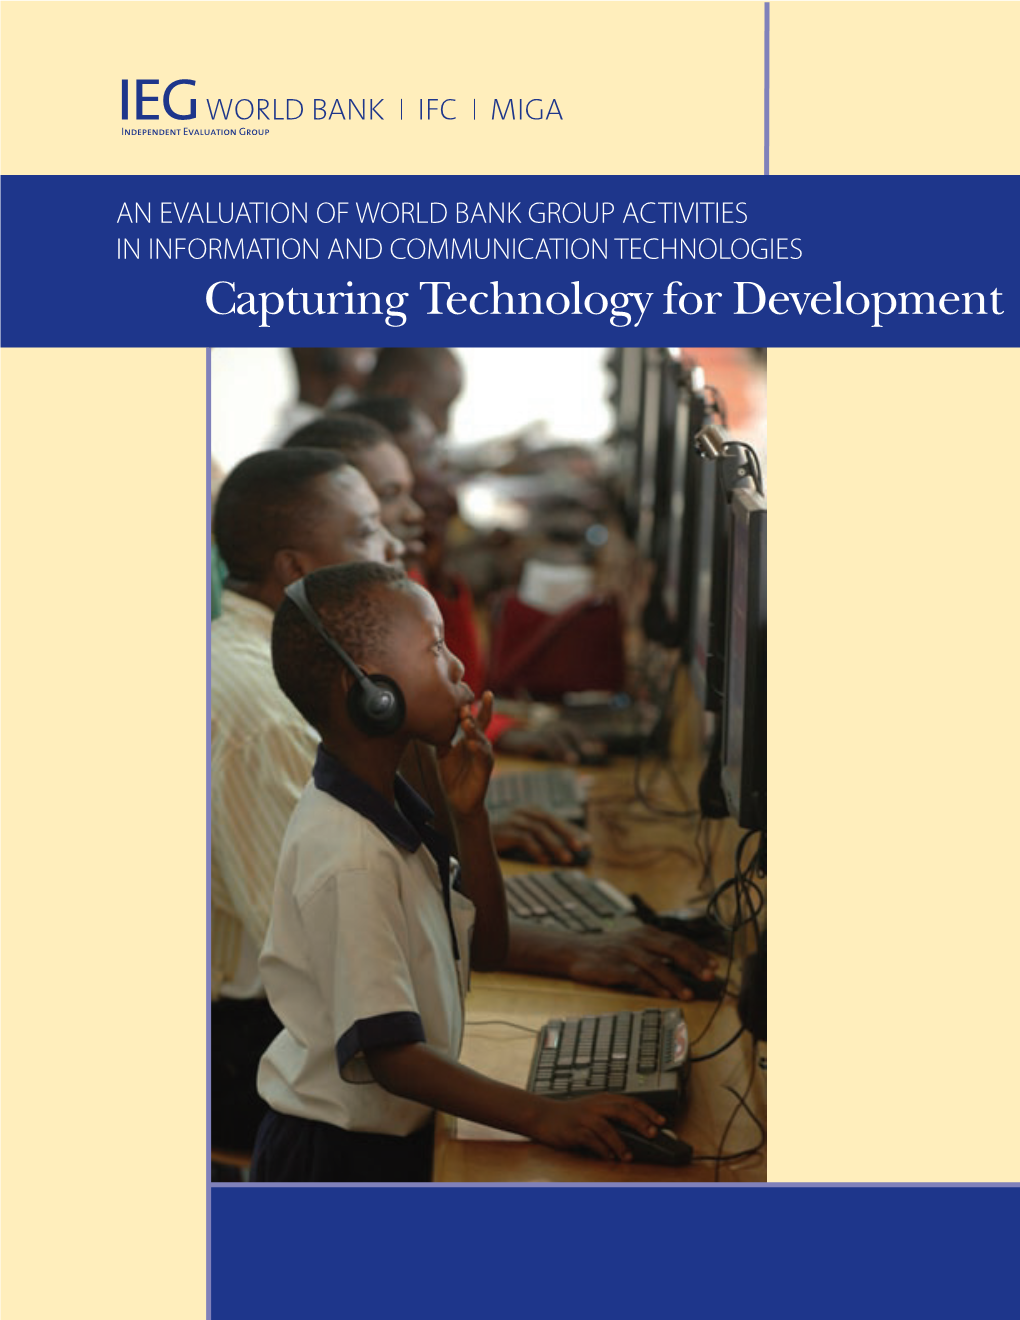 Capturing Technology for Development: an Evaluation of World Bank Group Activities in Information and Communication Technologies